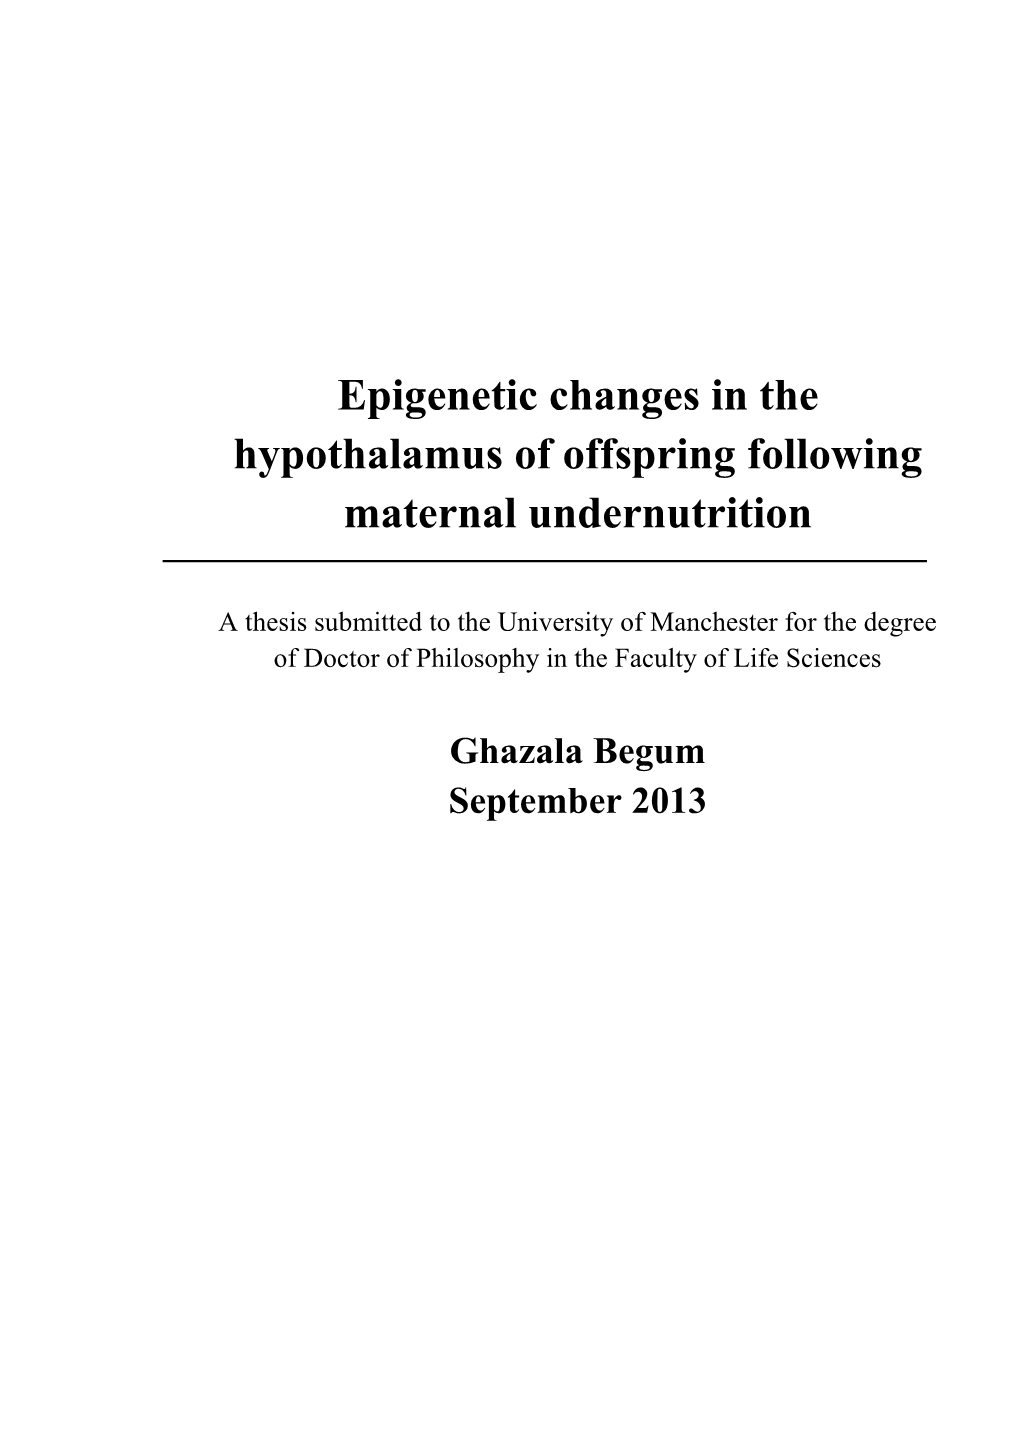 Epigenetic Changes in the Hypothalamus of Offspring Following Maternal Undernutrition